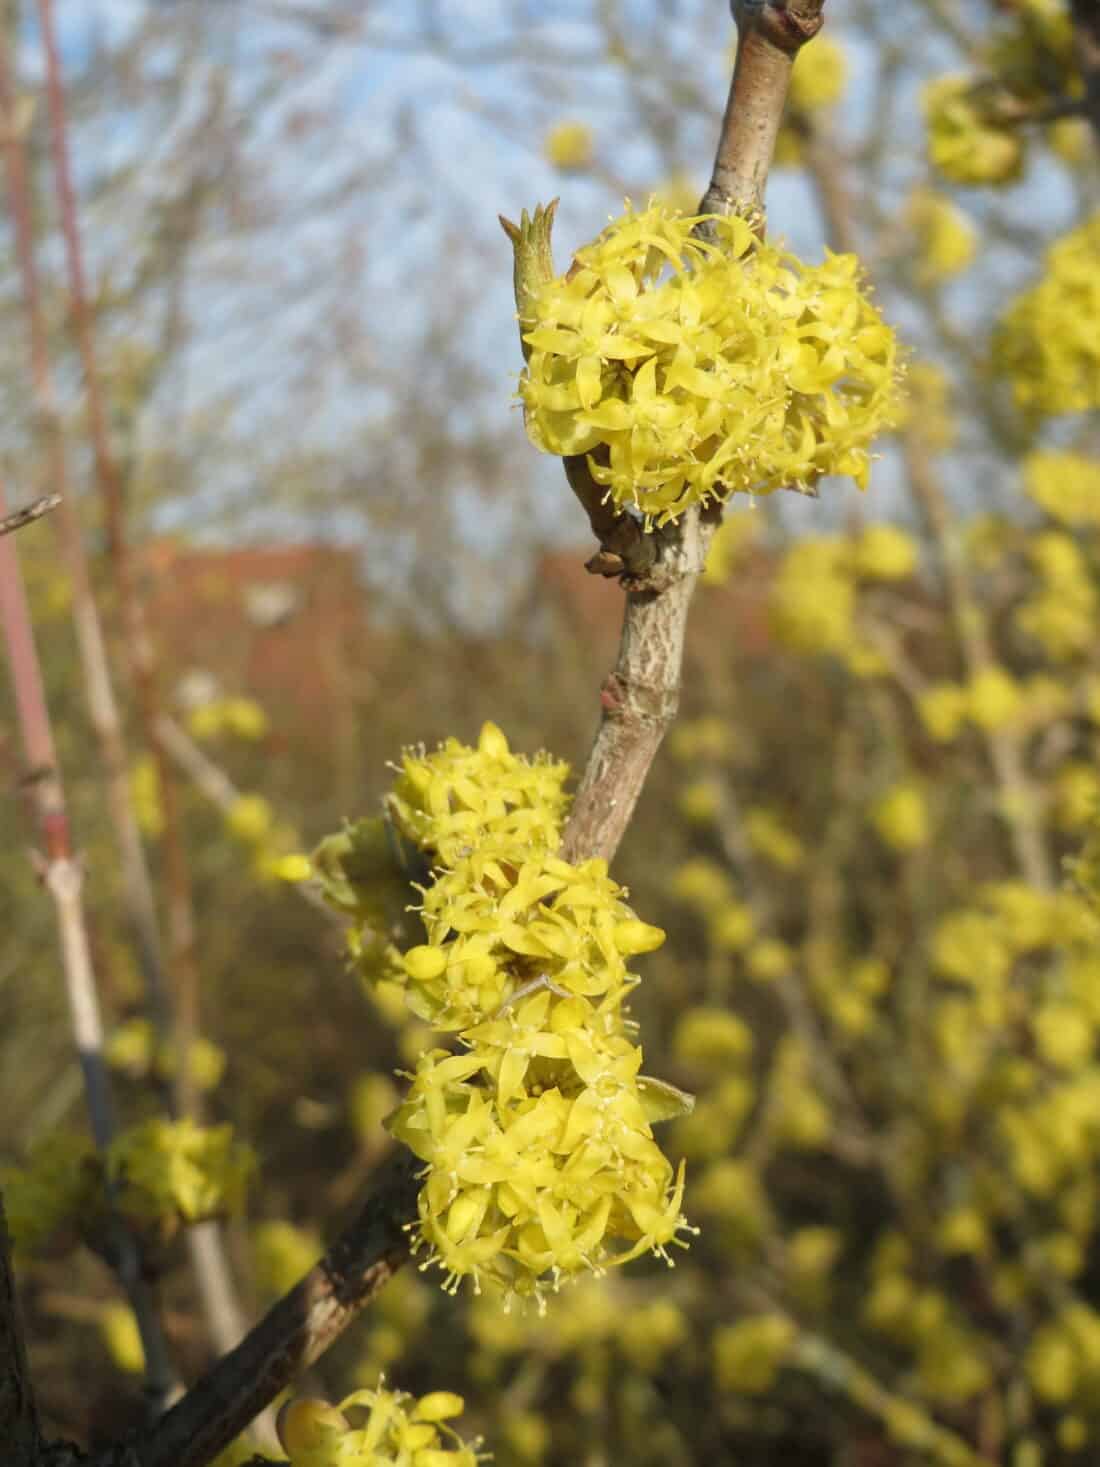 Yellow flowers on a tree branch.